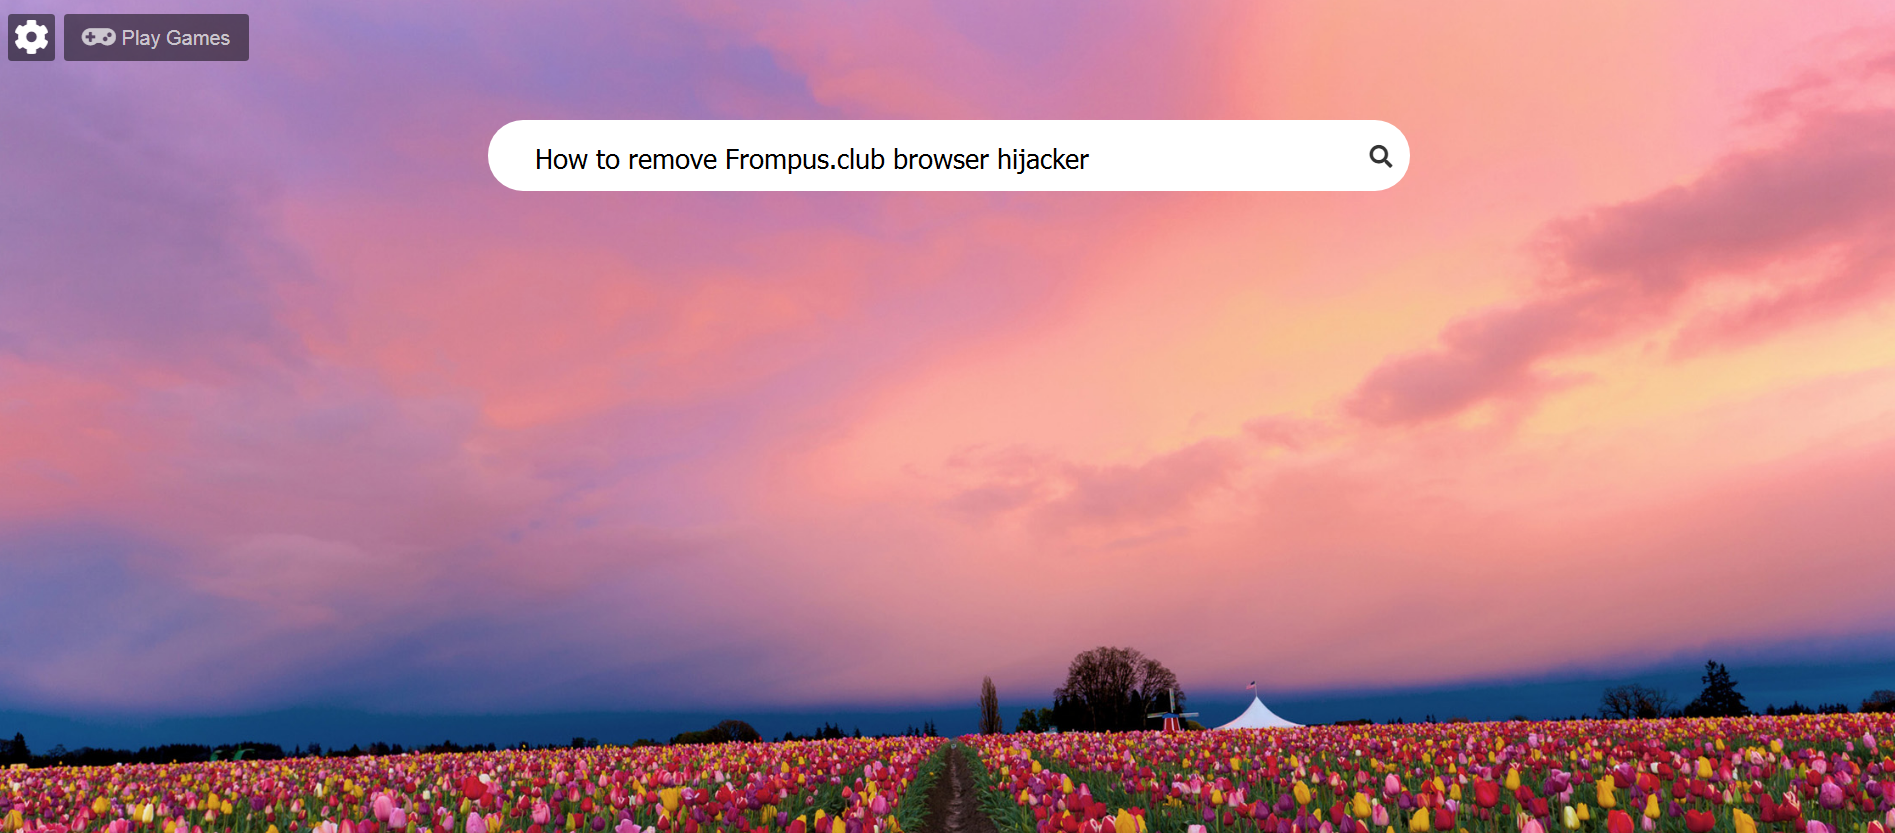 how to remove frompus.club browser hijacker